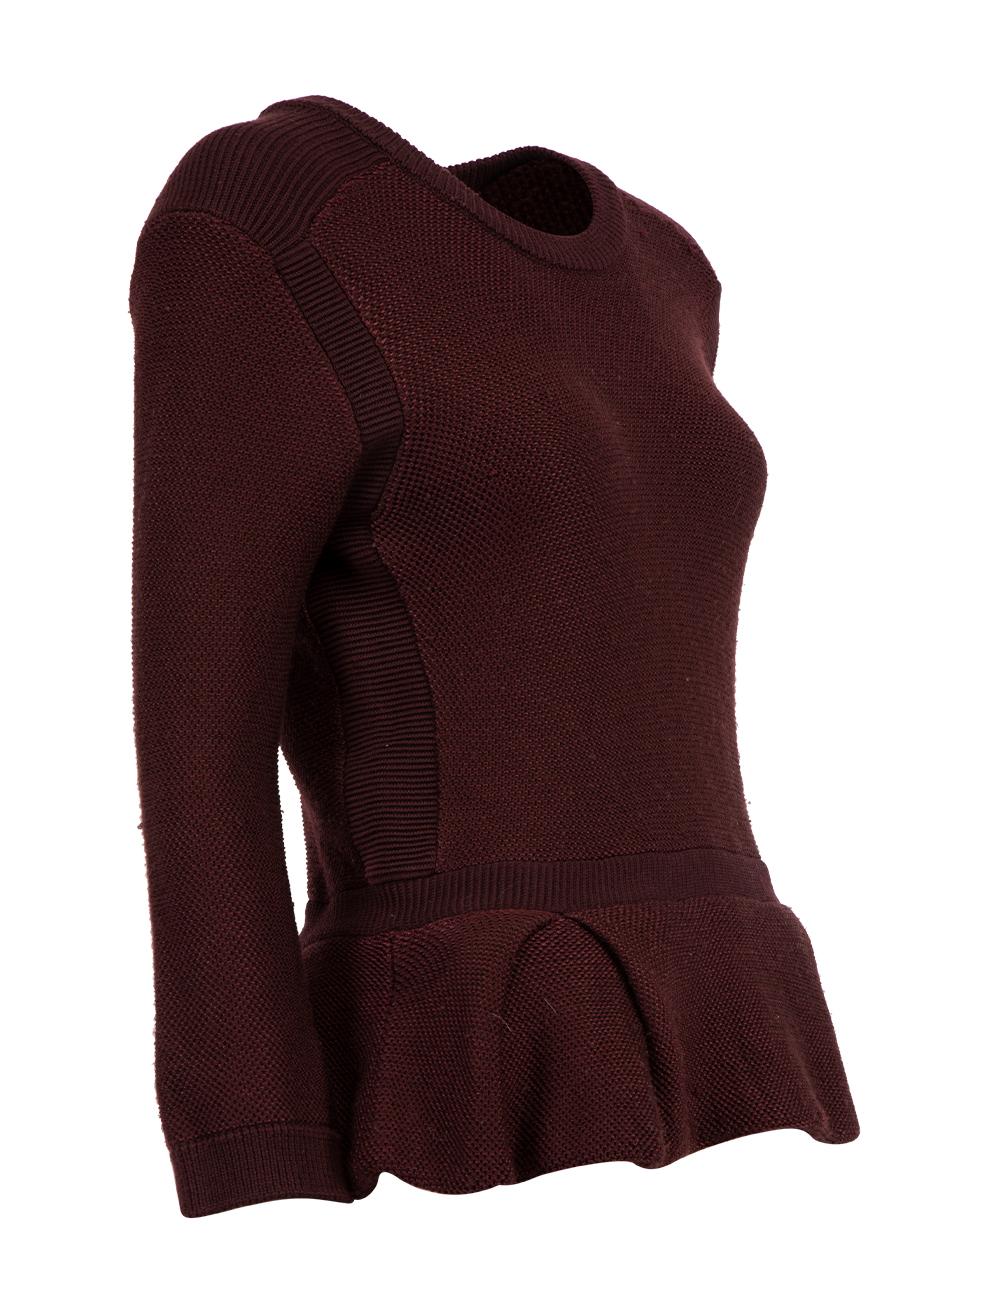 CONDITION is Very good. Minimal wear to jumper is evident. Mioderate signs of pilling and loose threads seen all over on this used Burberry London designer resale item. Details Burgundy Synthetic Knitted jumper Long sleeves Crew neckline Peplum